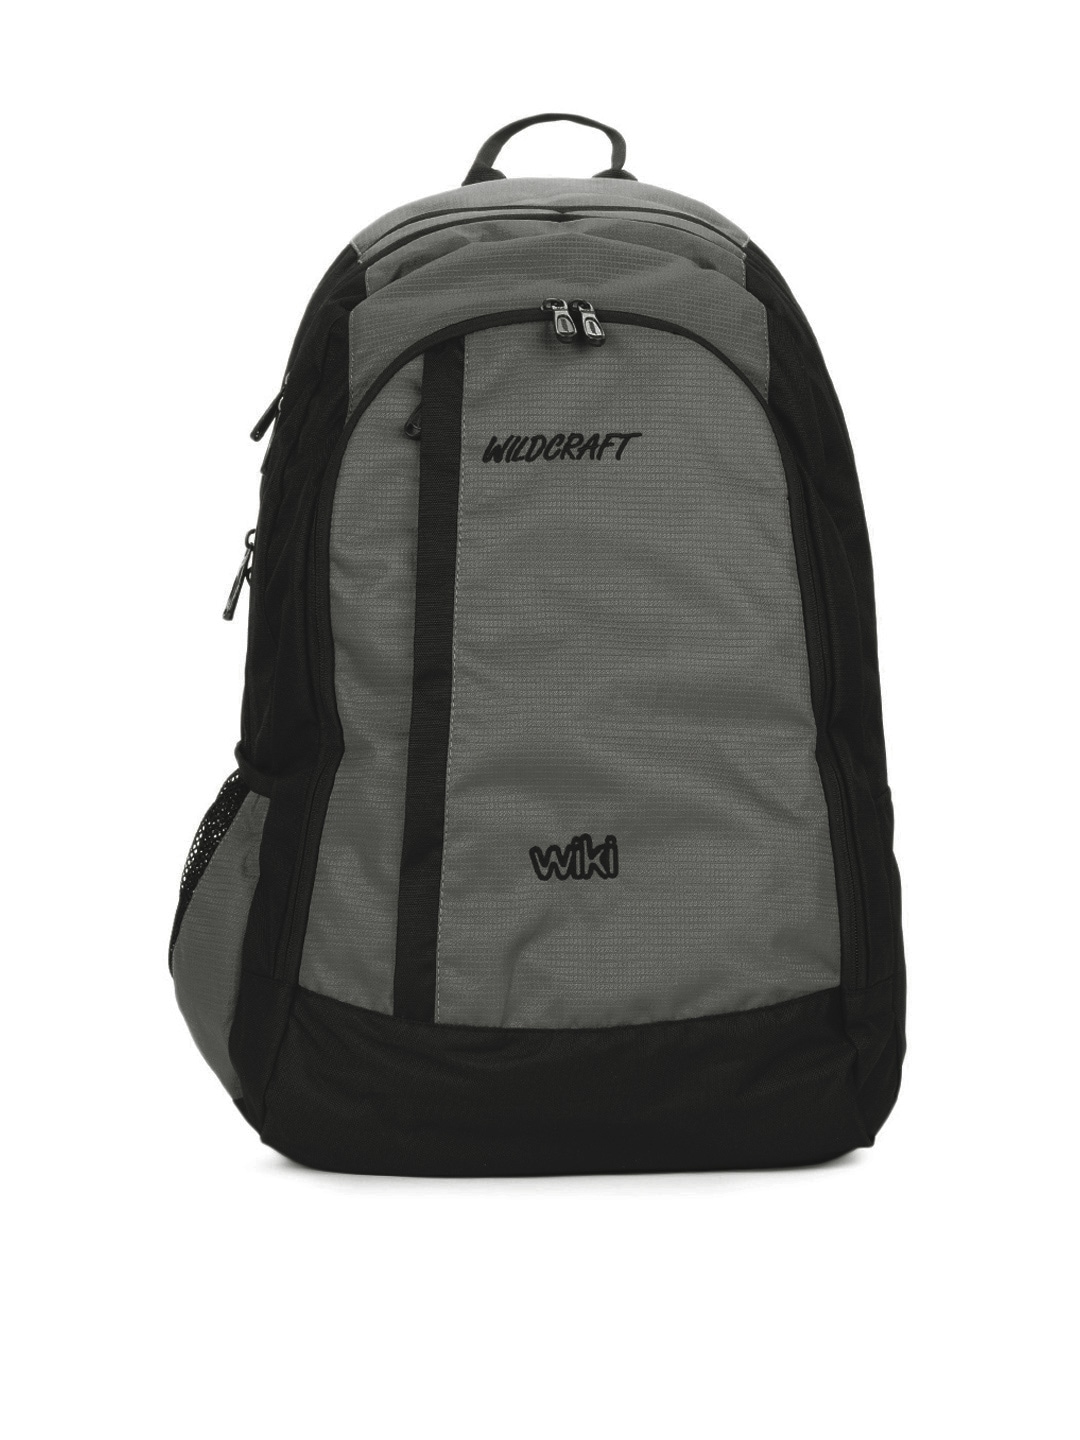 Wildcraft Unisex Outdoors Within Grey Backpack